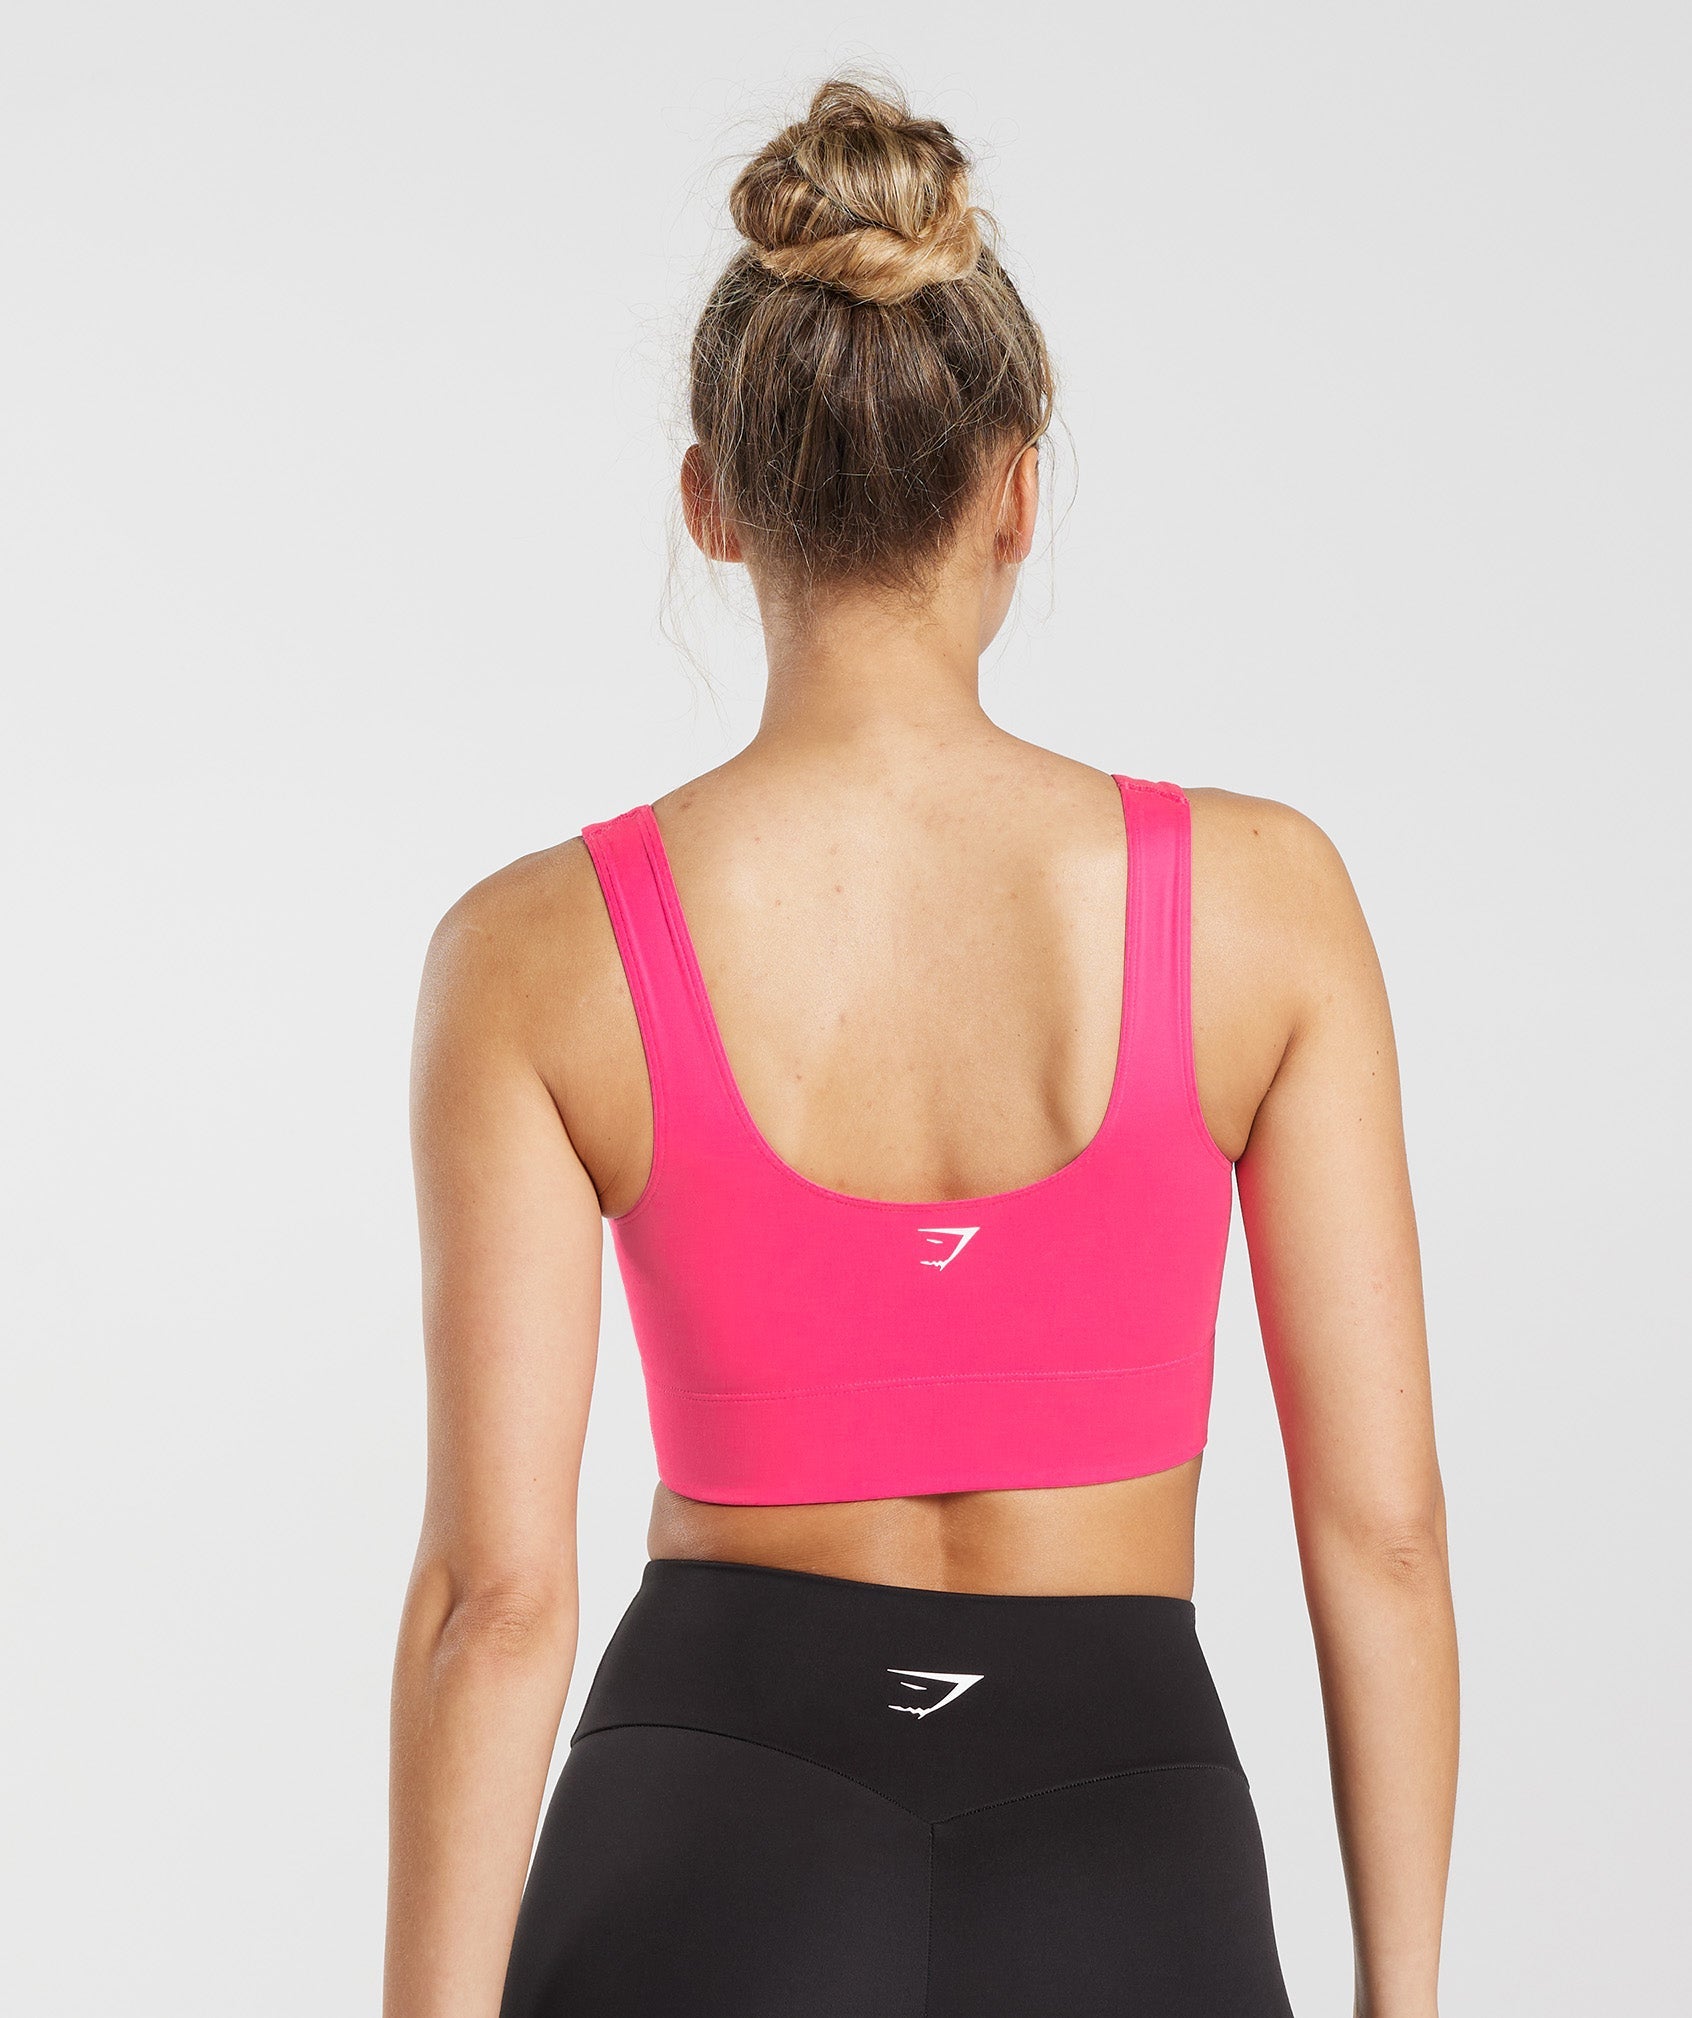 Gymshark Ruched Sports Bra Pink - $24 (20% Off Retail) - From